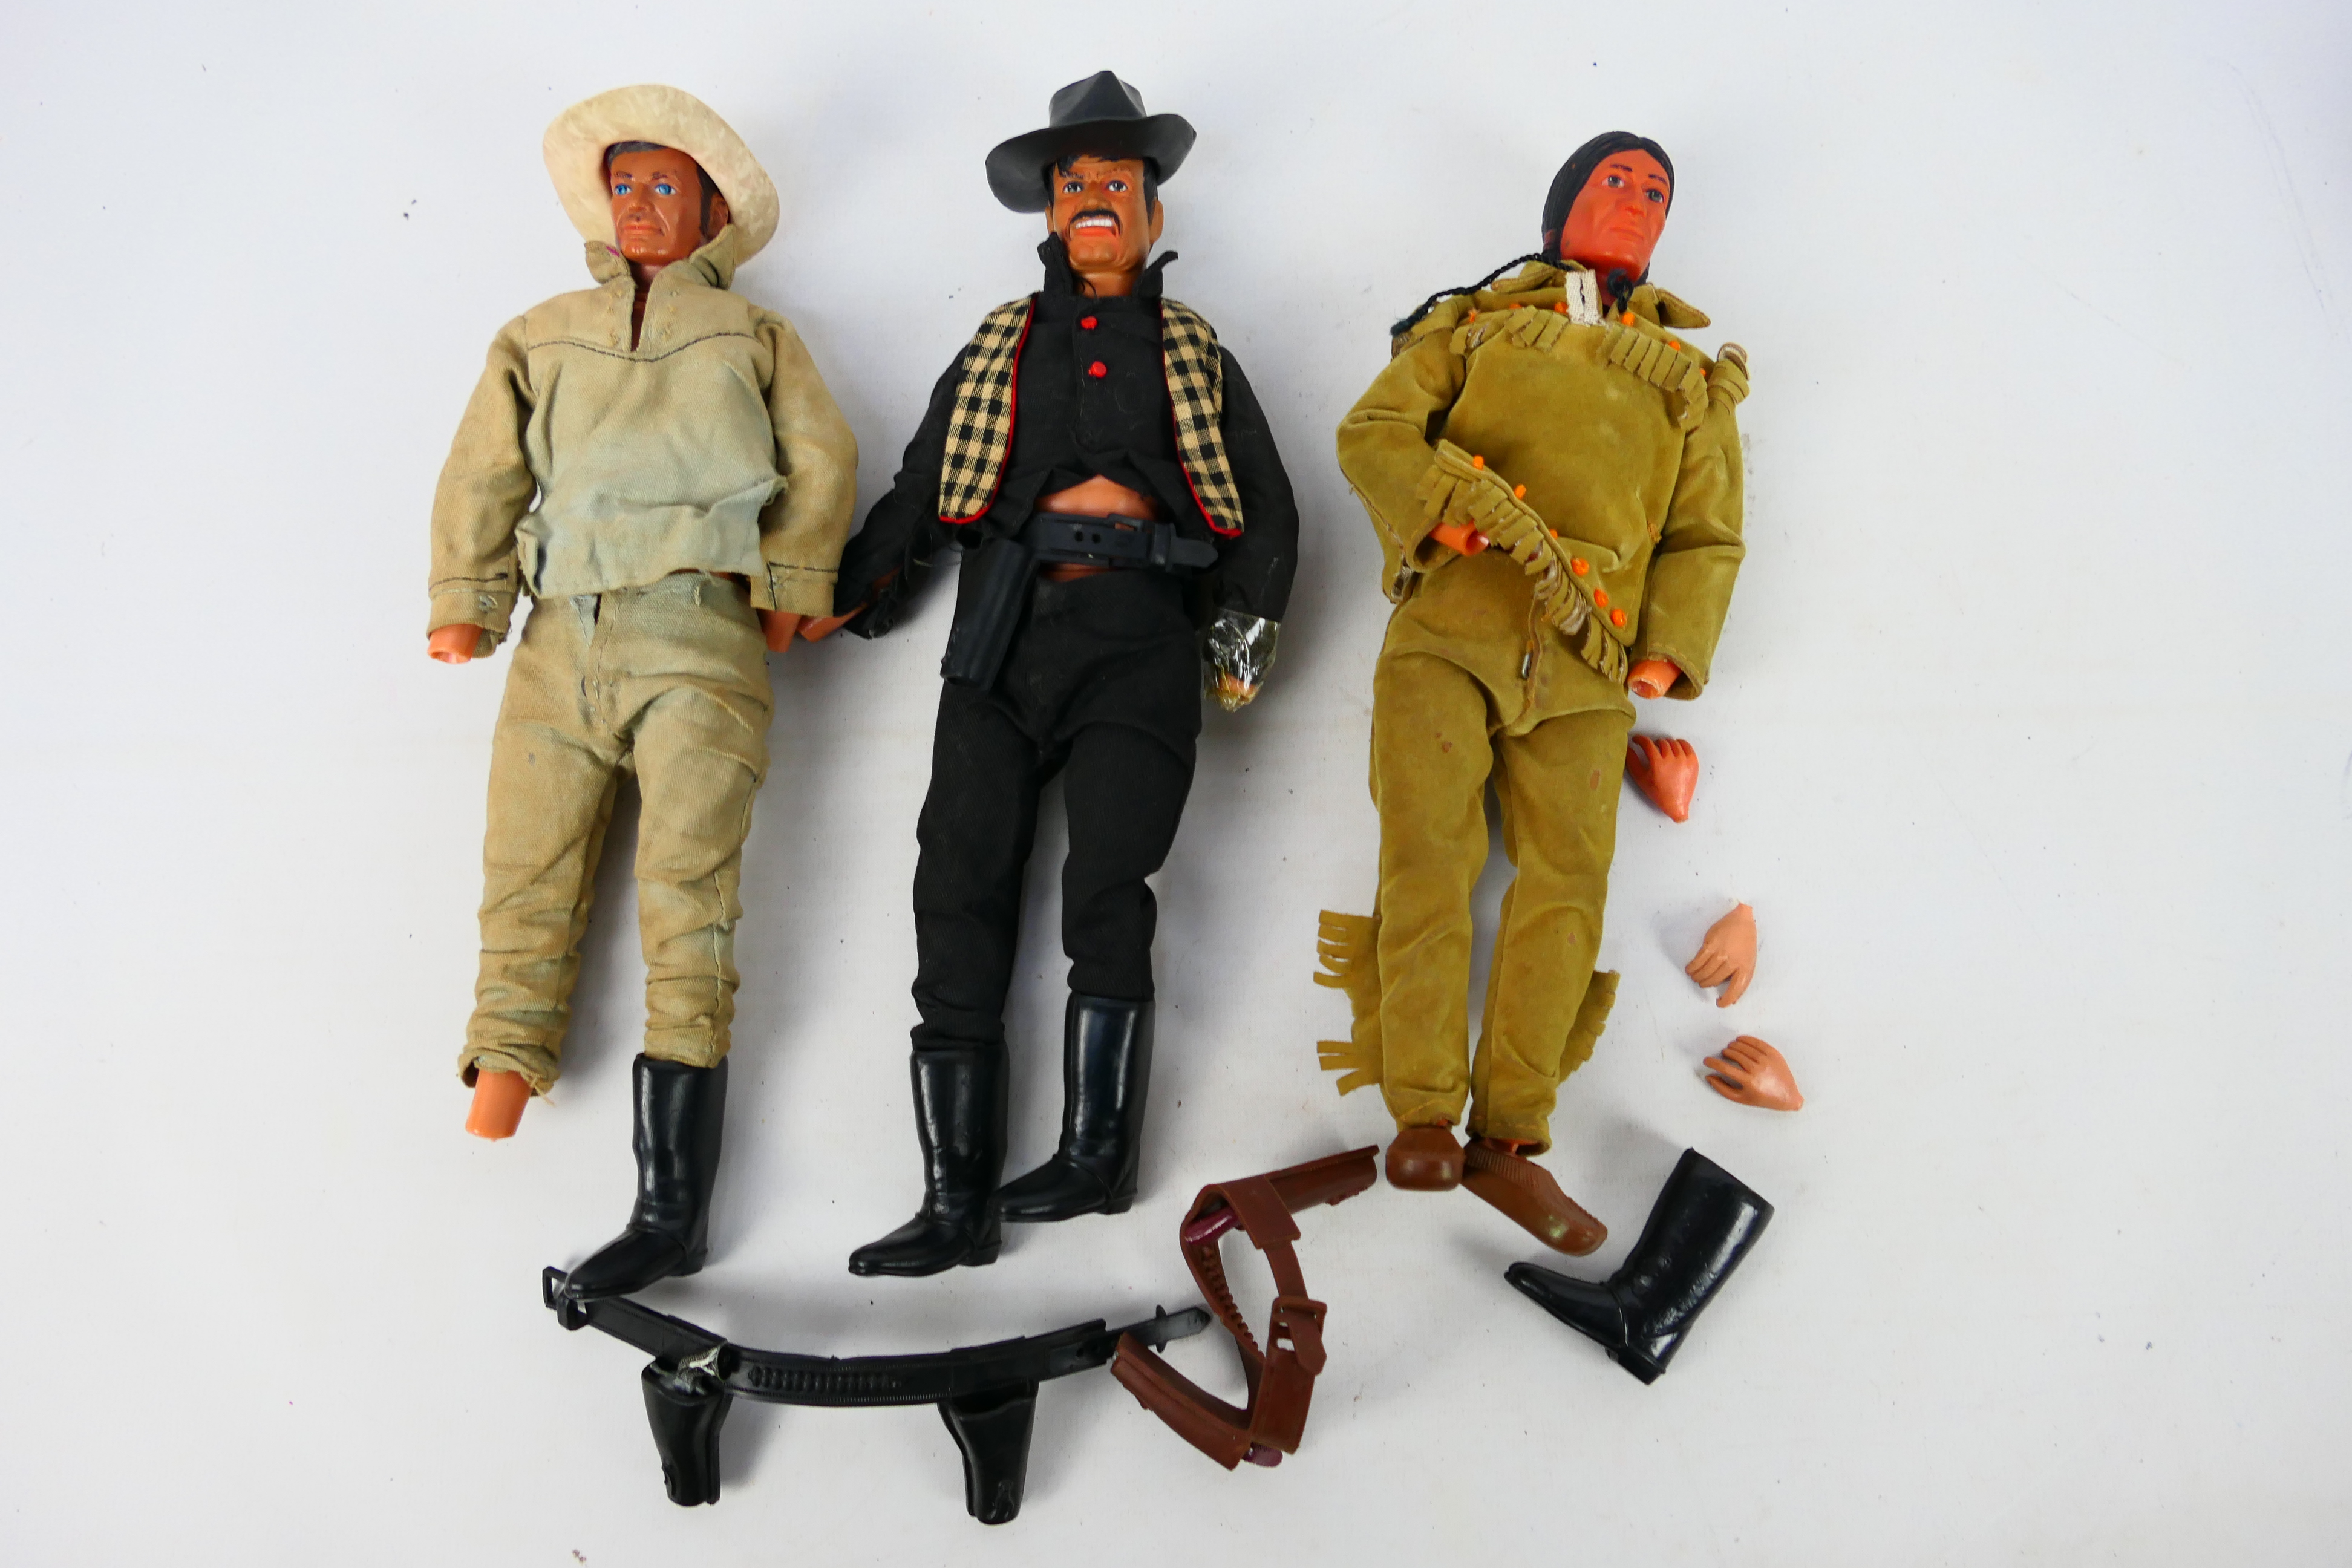 Marx Toys - Lone ranger - A set of 3 unboxed Long Ranger 10" action figures (1973) comprising